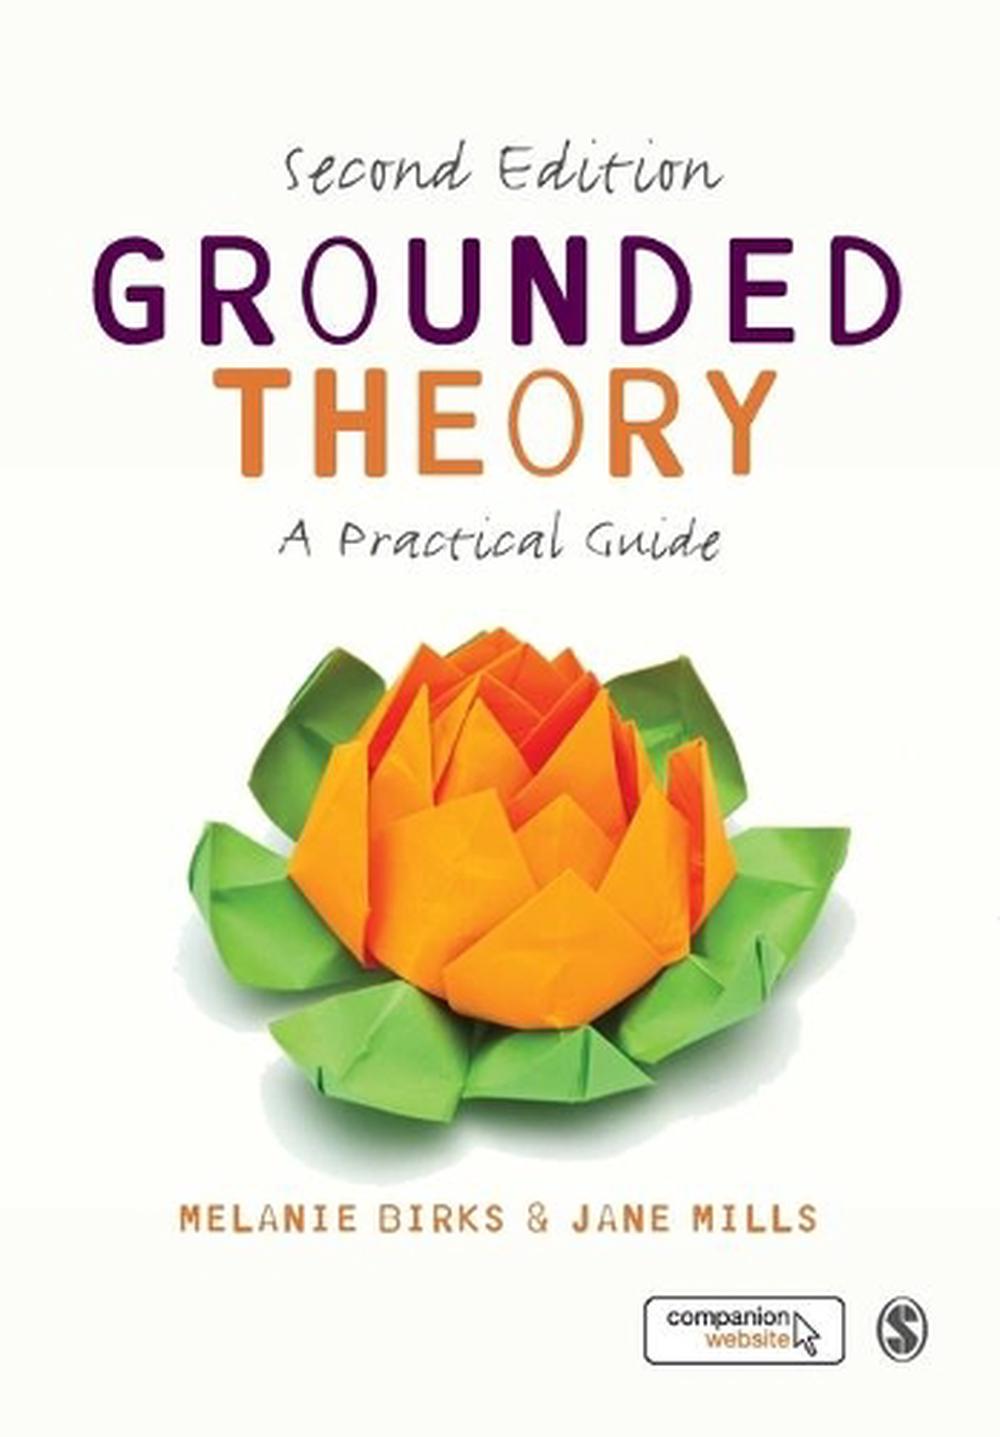 Grounded Theory by Melanie Birks, Paperback, 9781446295786 | Buy online ...